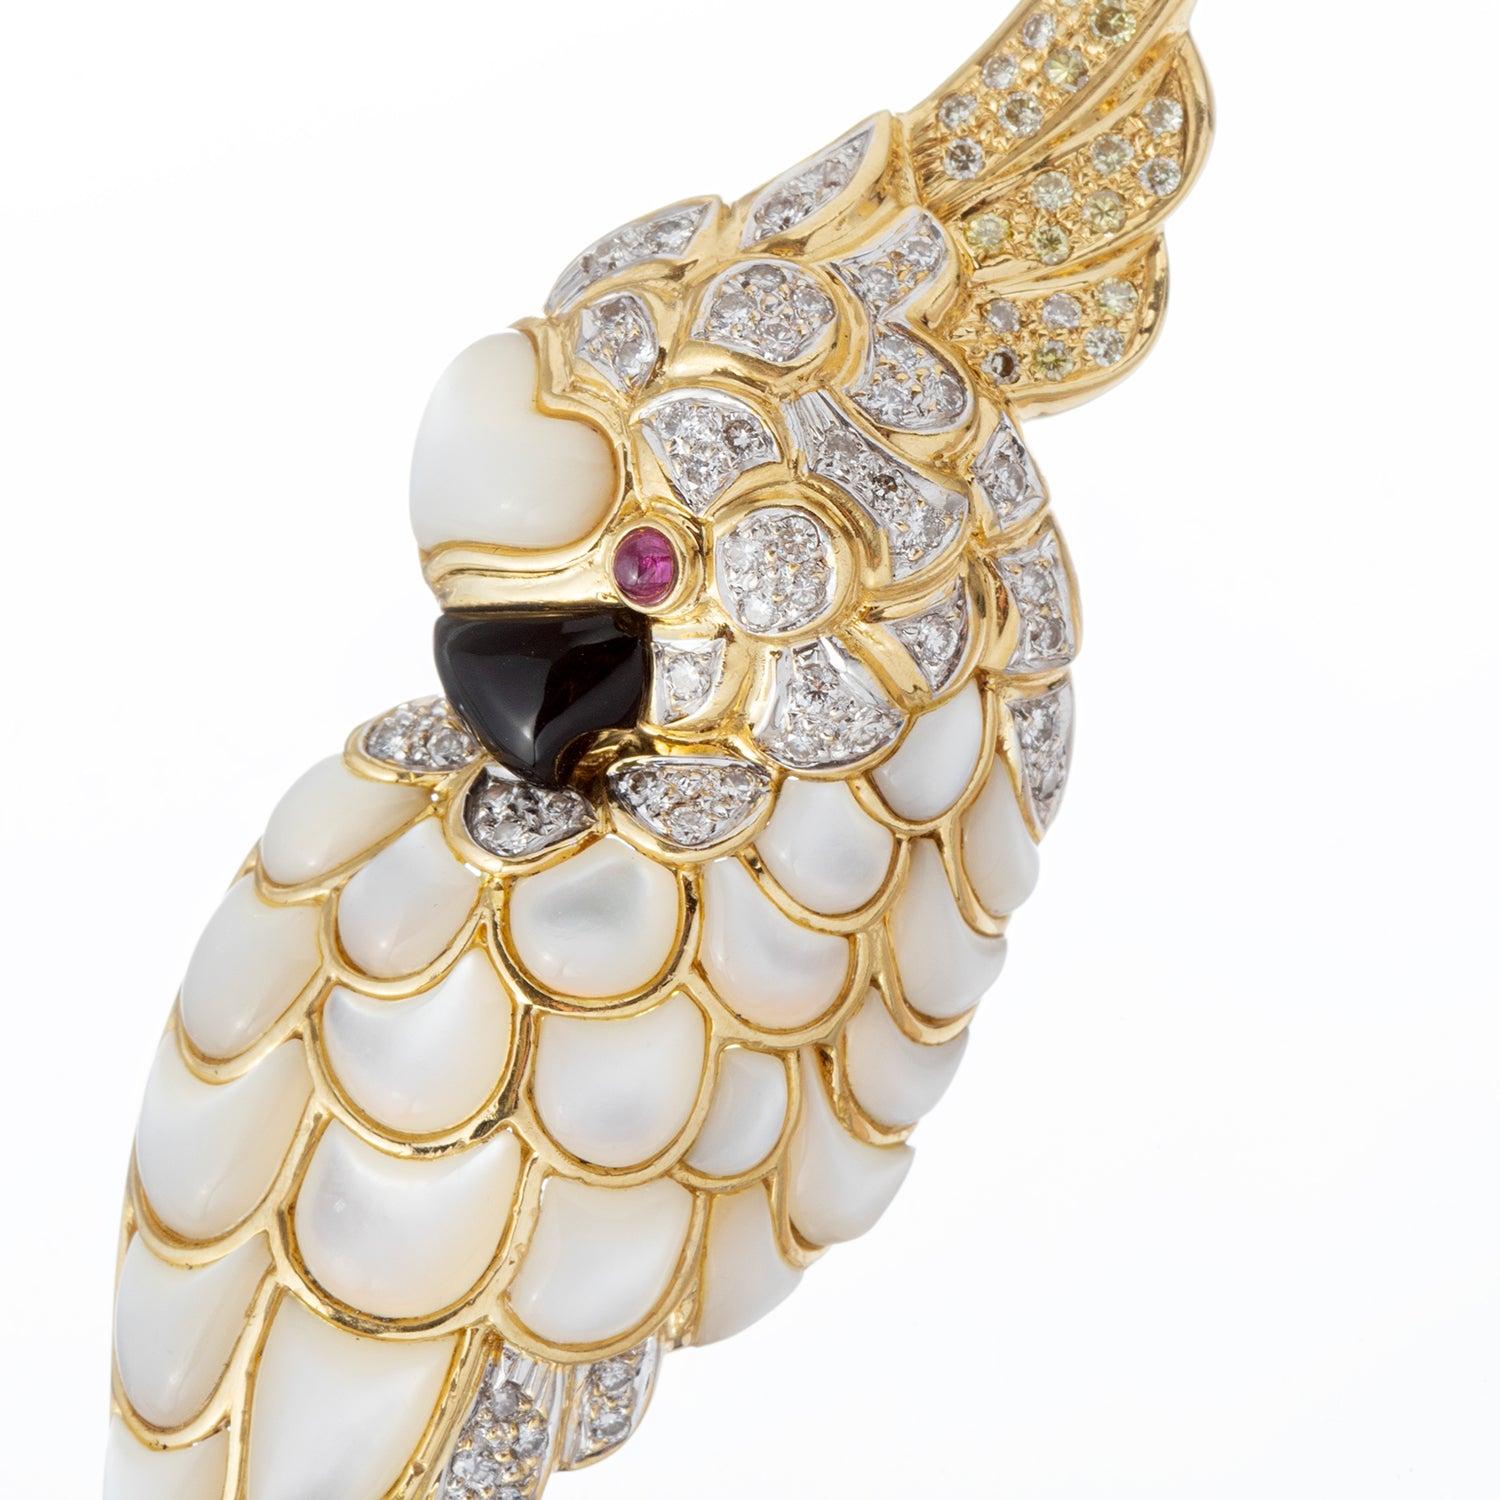 Cockatoo pendant brooch in 18k yellow gold, featuring round-cut diamond-set head and tail feathers, as well as carved mother-of-pearl feathers and a single ruby eye.

Double pin stem backing.  Loop at top of back so it can also be worn on a neck